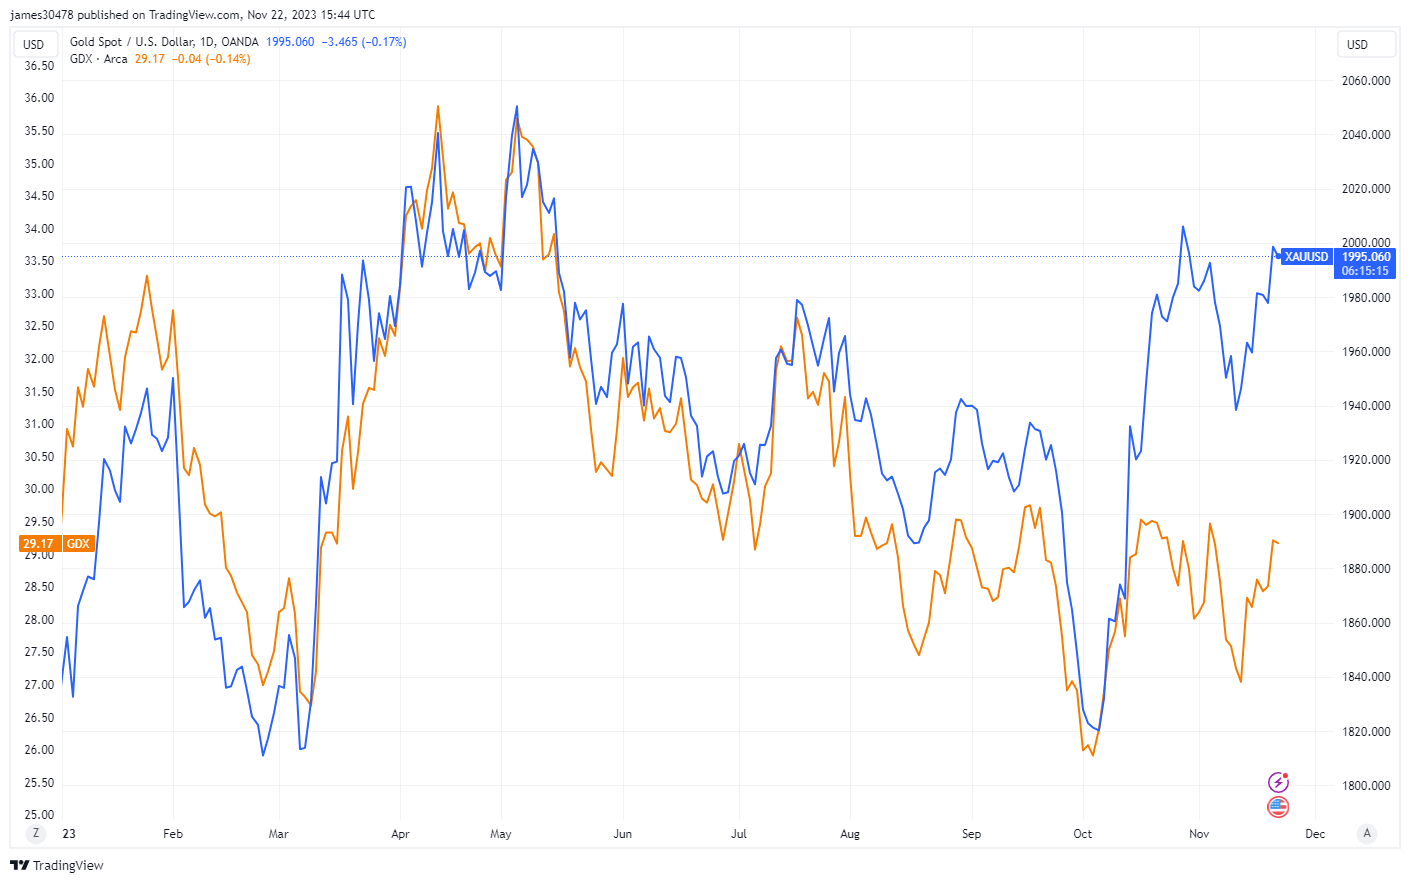 Gold vs Gold Miner ETF: (Source: Trading View)